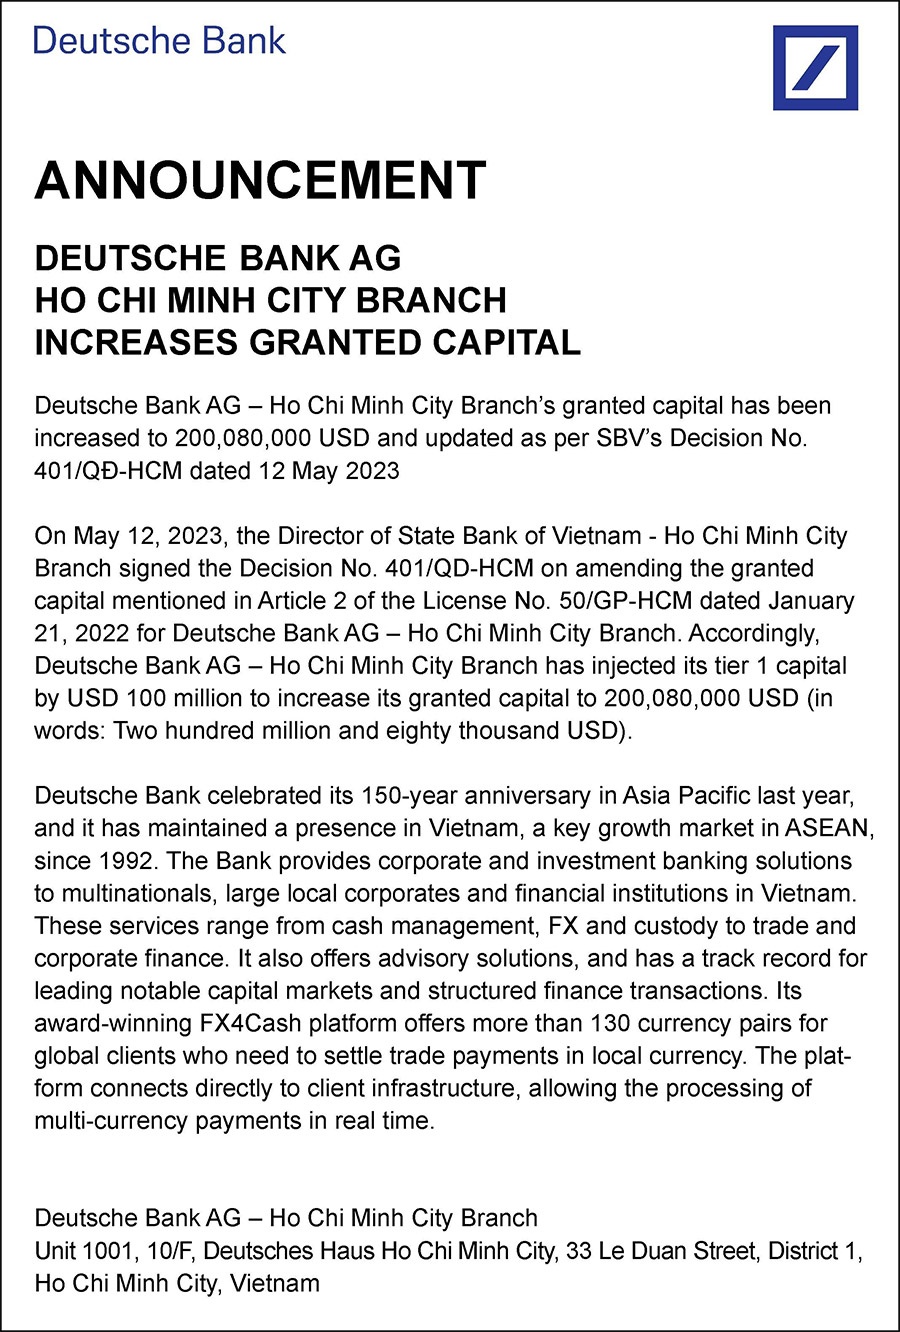 Deutsche Bank AG Ho Chi Minh City branch increases granted capital